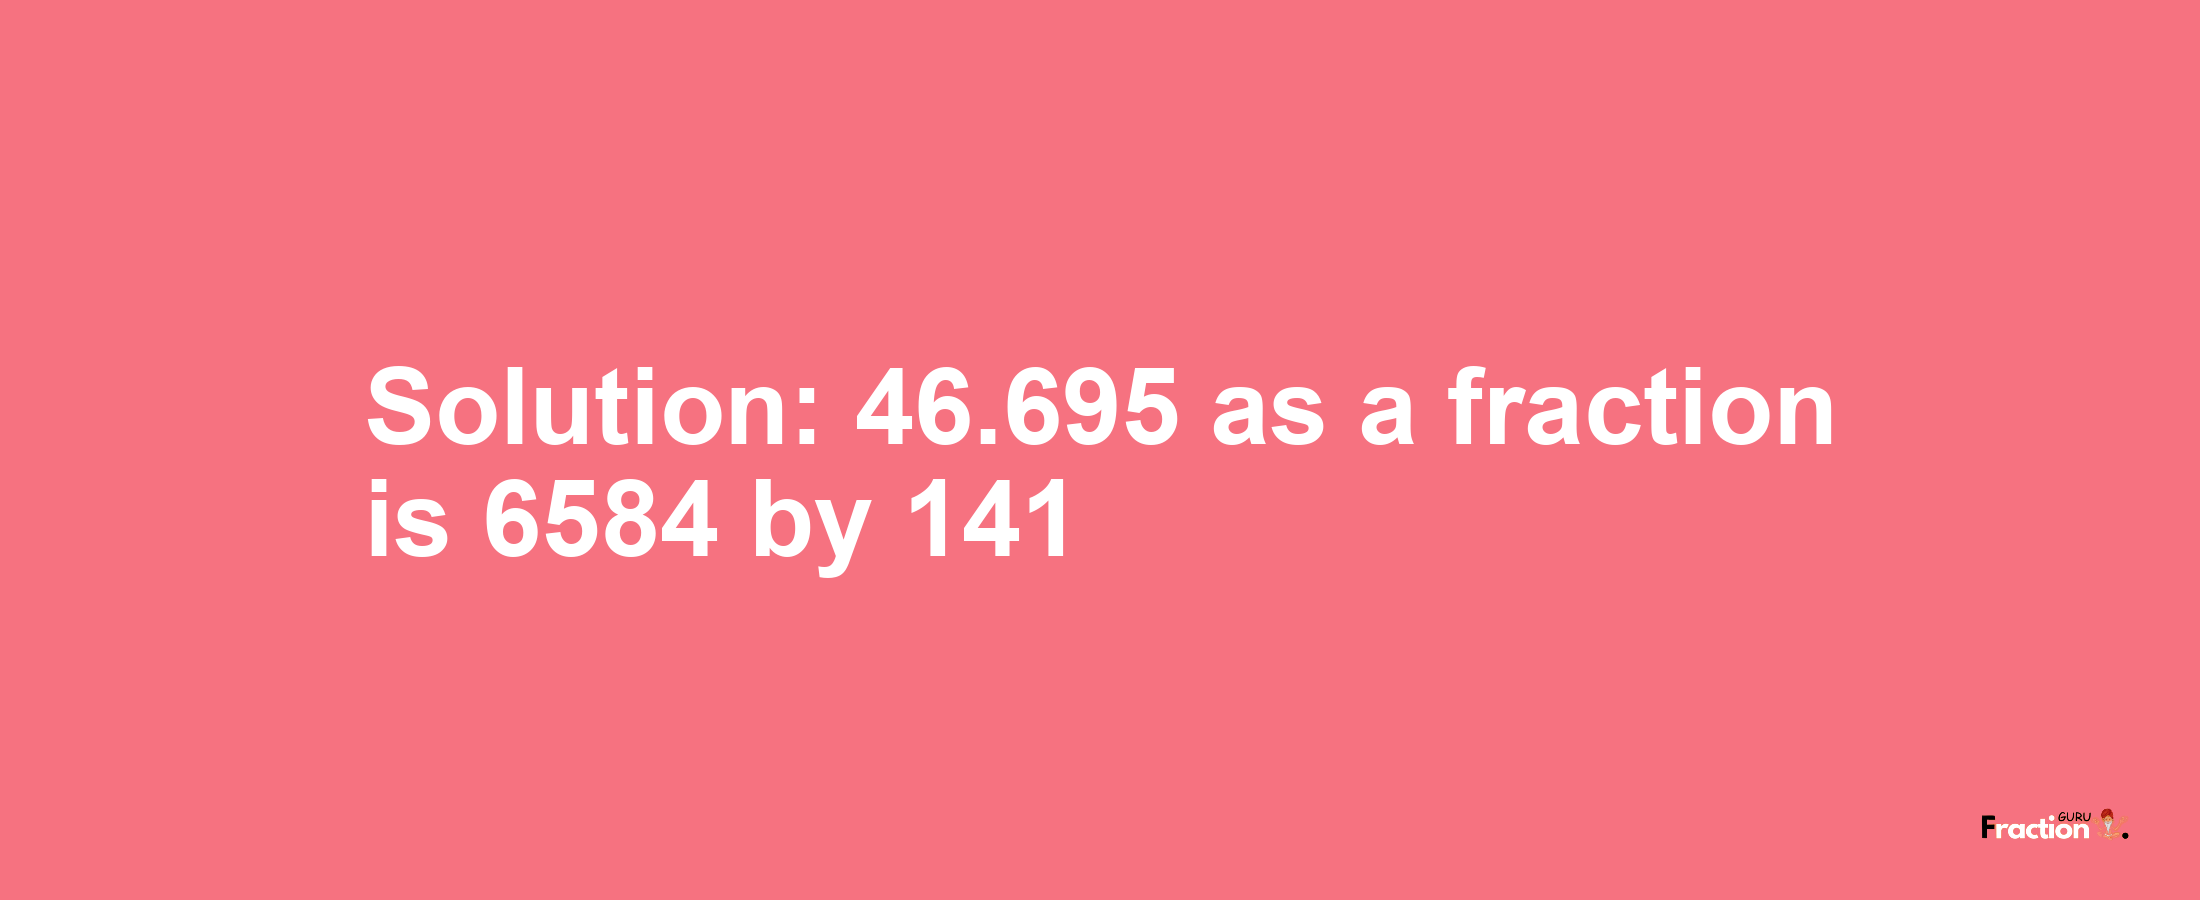 Solution:46.695 as a fraction is 6584/141